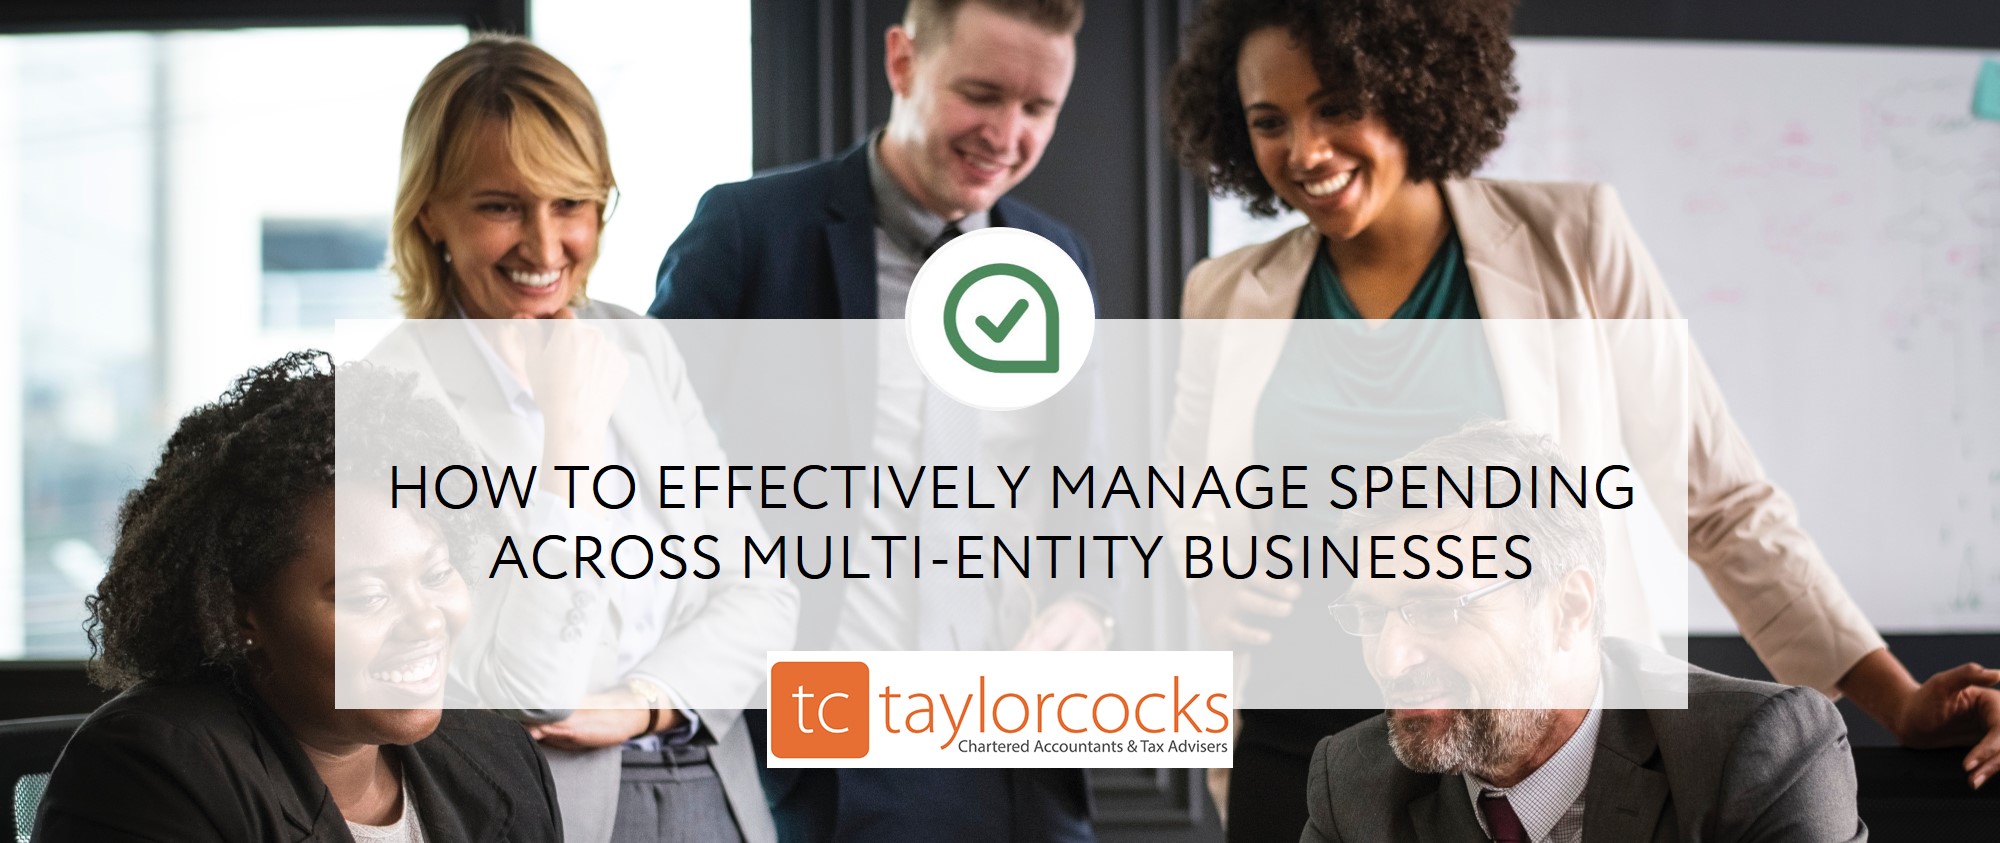 Success Story: How to effectively manage spending across multi-entity businesses